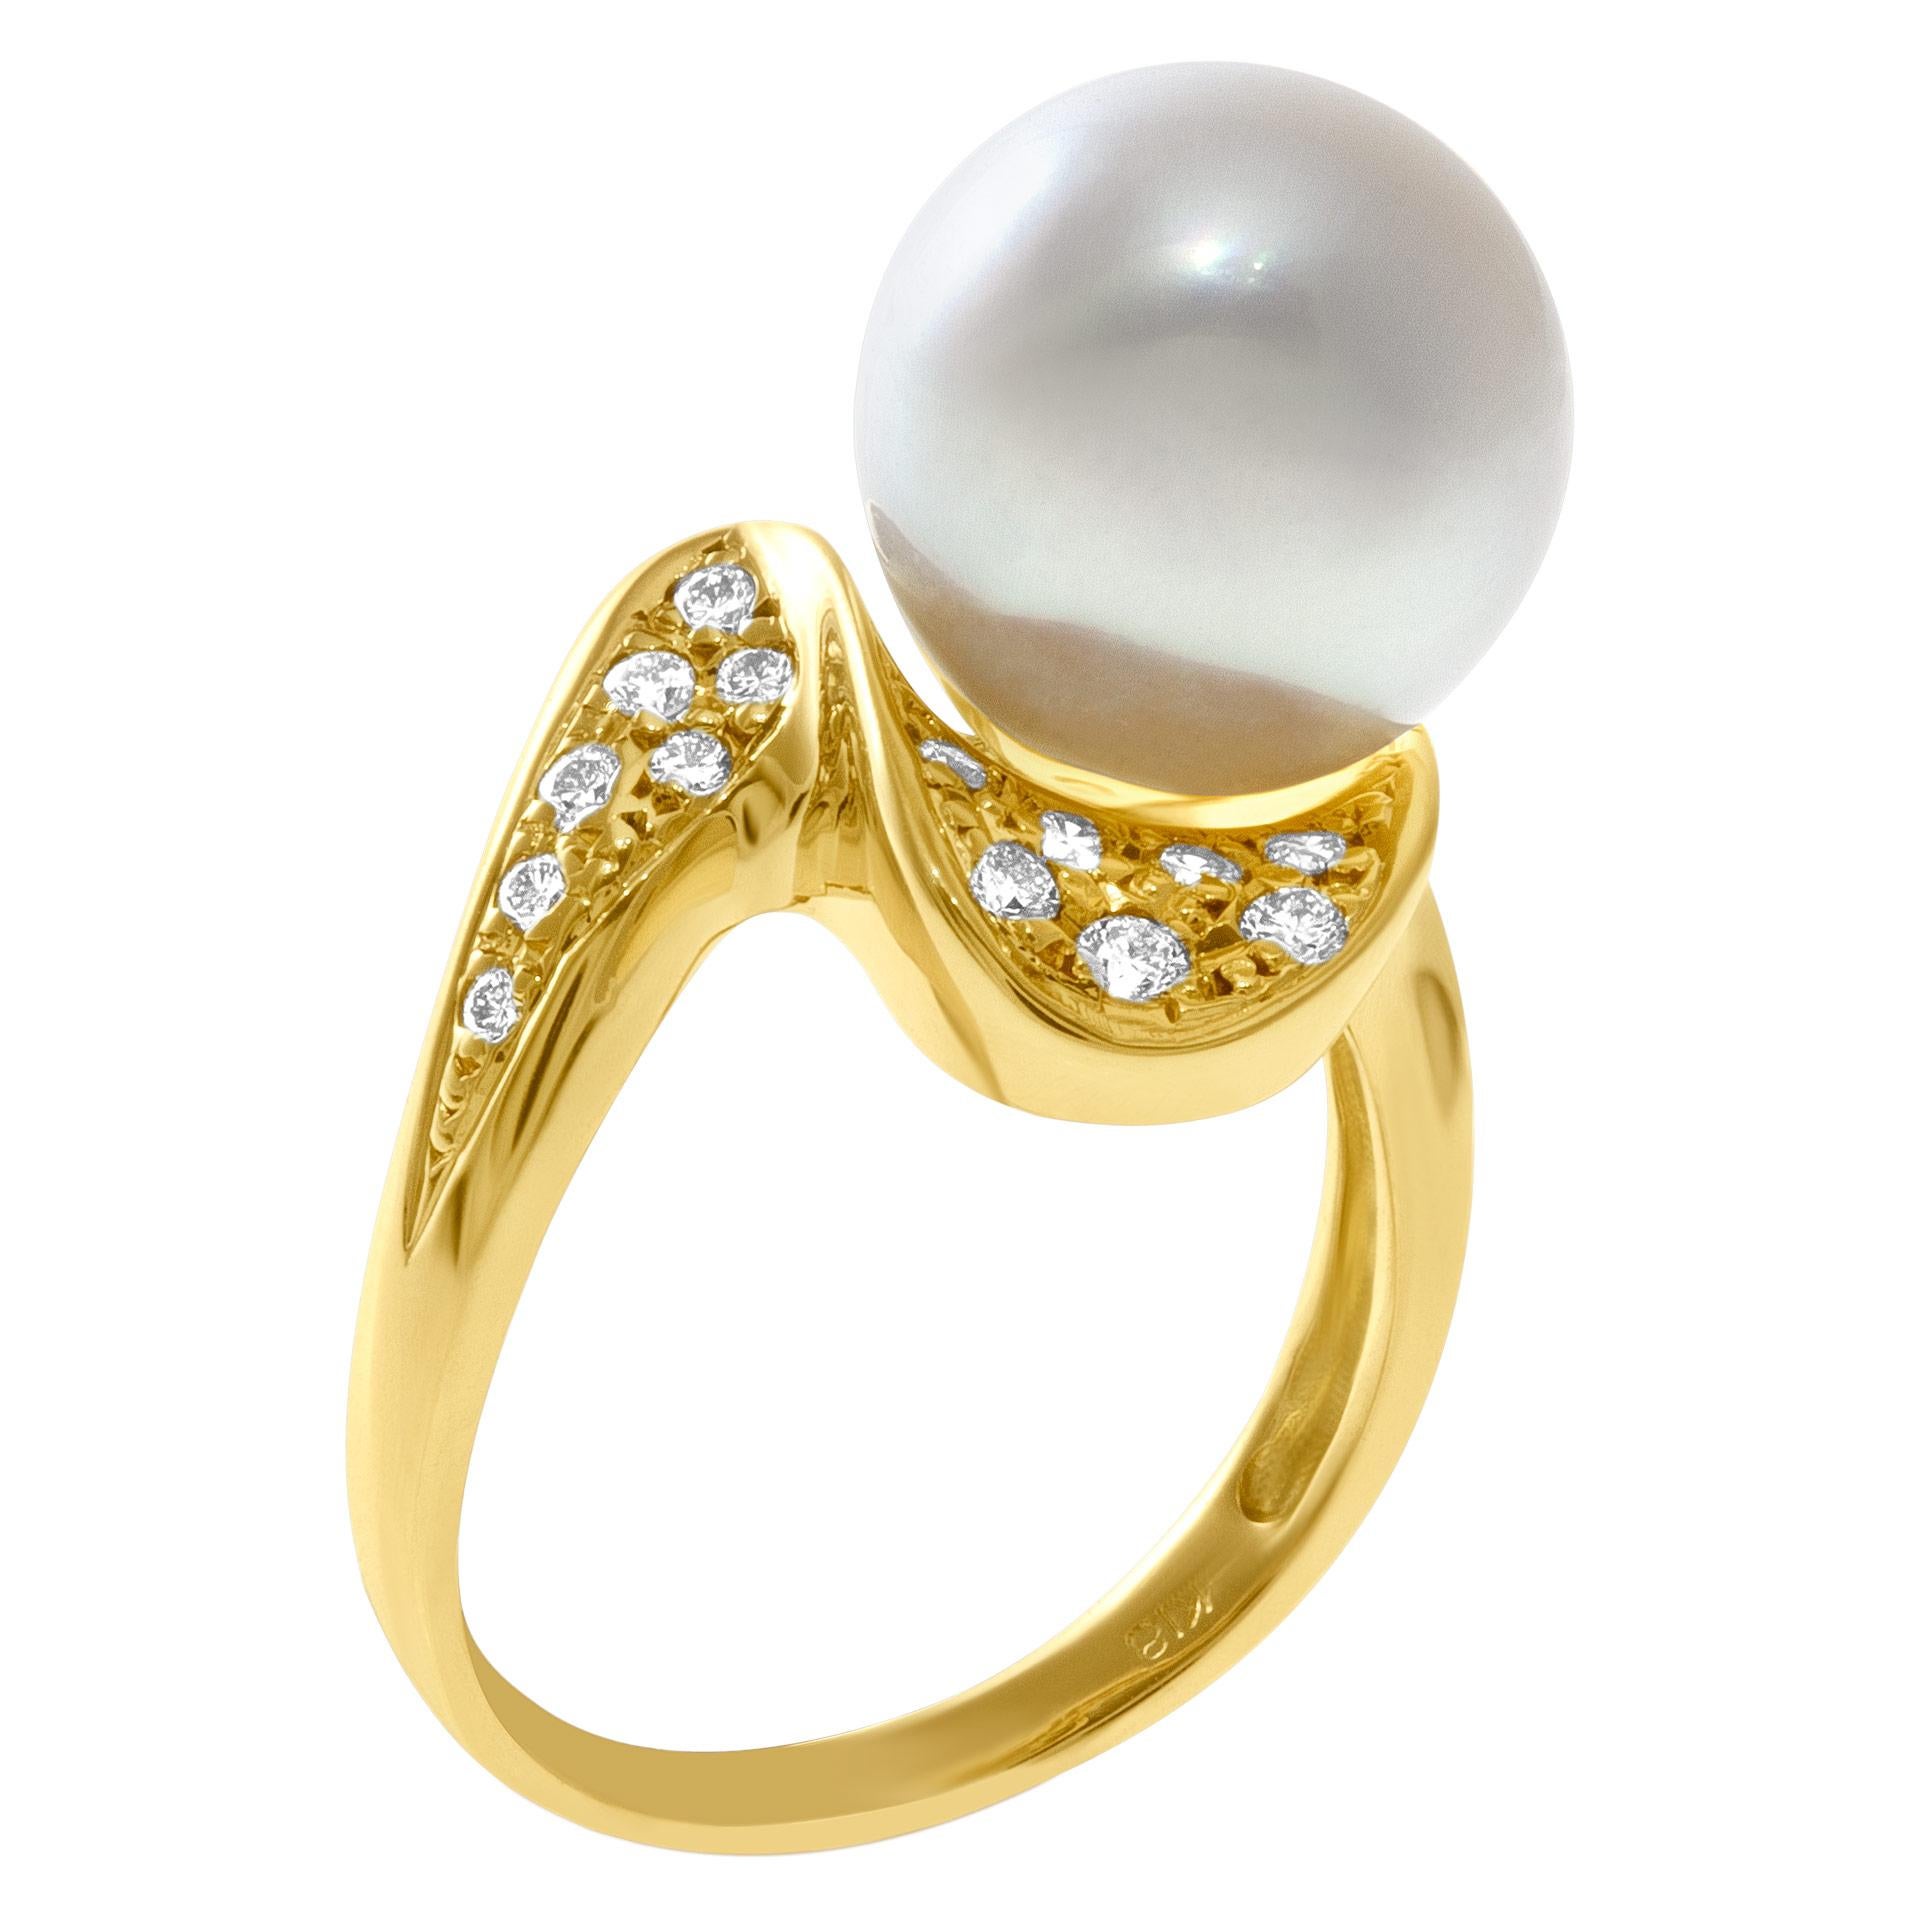 Pearl and diamond ring in 18k yellow gold with center silver pearl 11.3mm. Size 6.25.

This Pearl/diamond ring is currently size 6.25 and some items can be sized up or down, please ask! It weighs 5 pennyweights and is 18k.